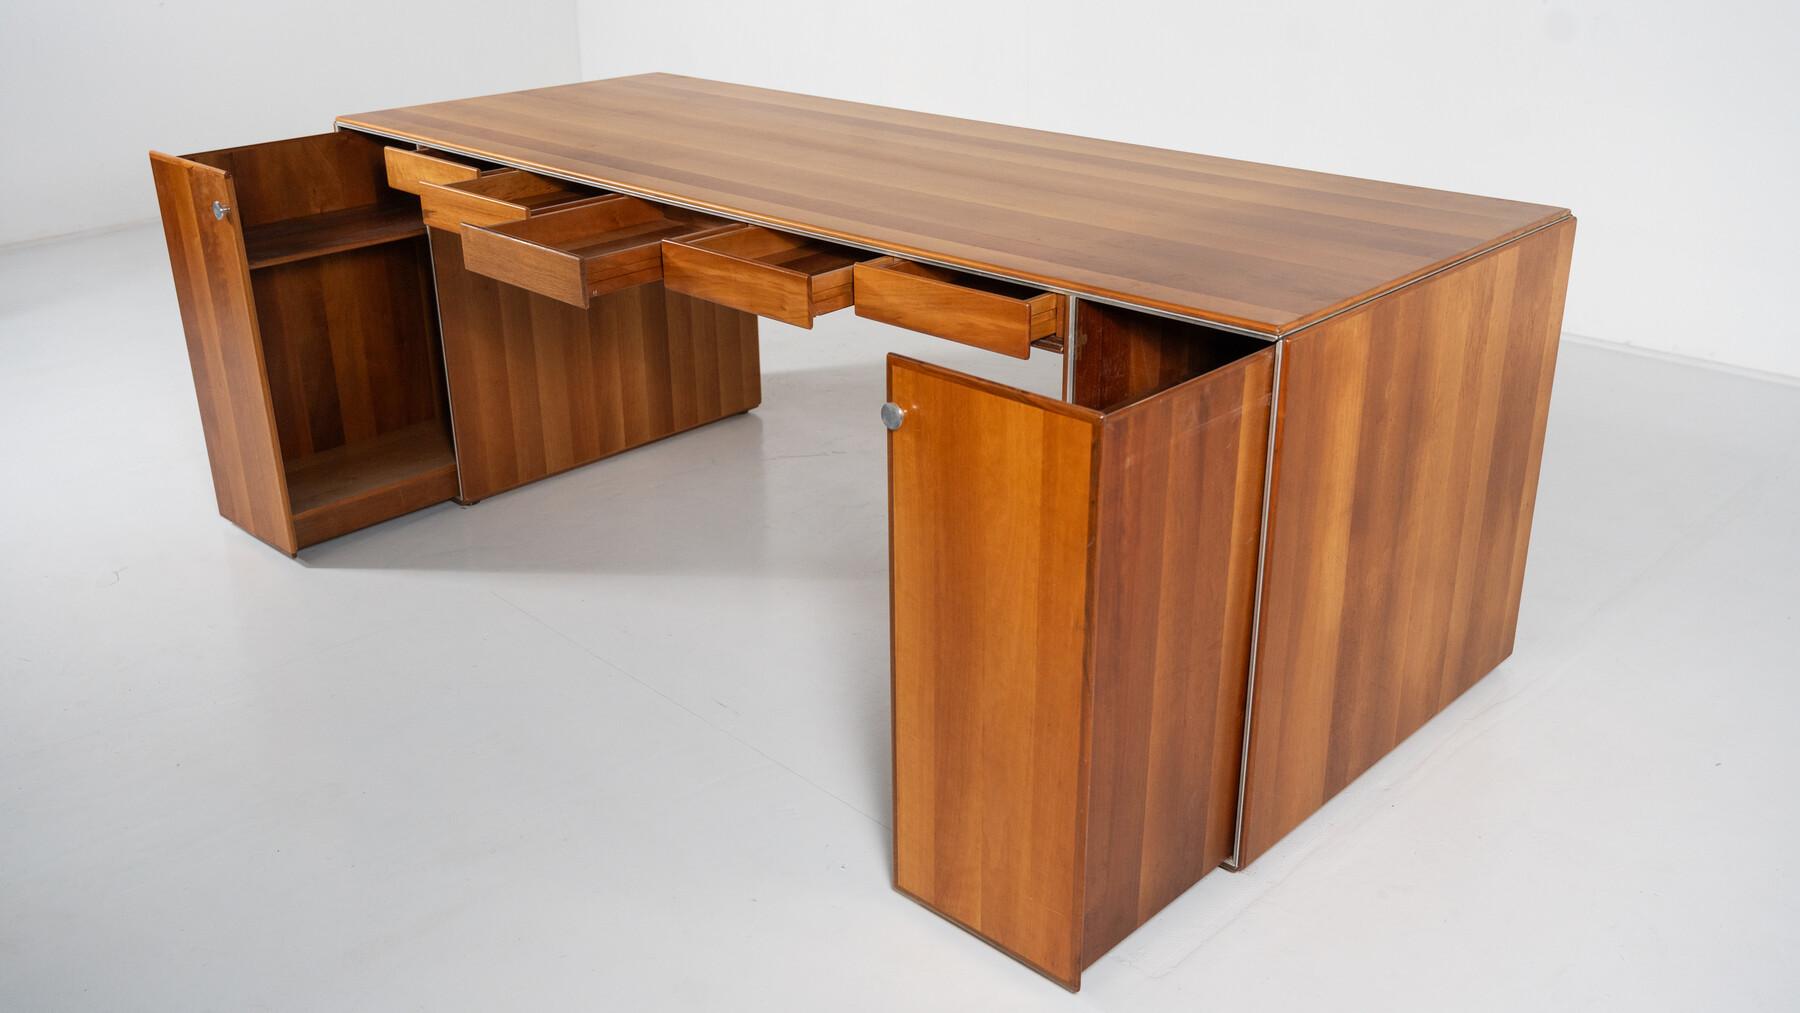 Late 20th Century Mid-Century Modern Desk by Afra and Tobia Scarpa, Stildomus 1970s For Sale